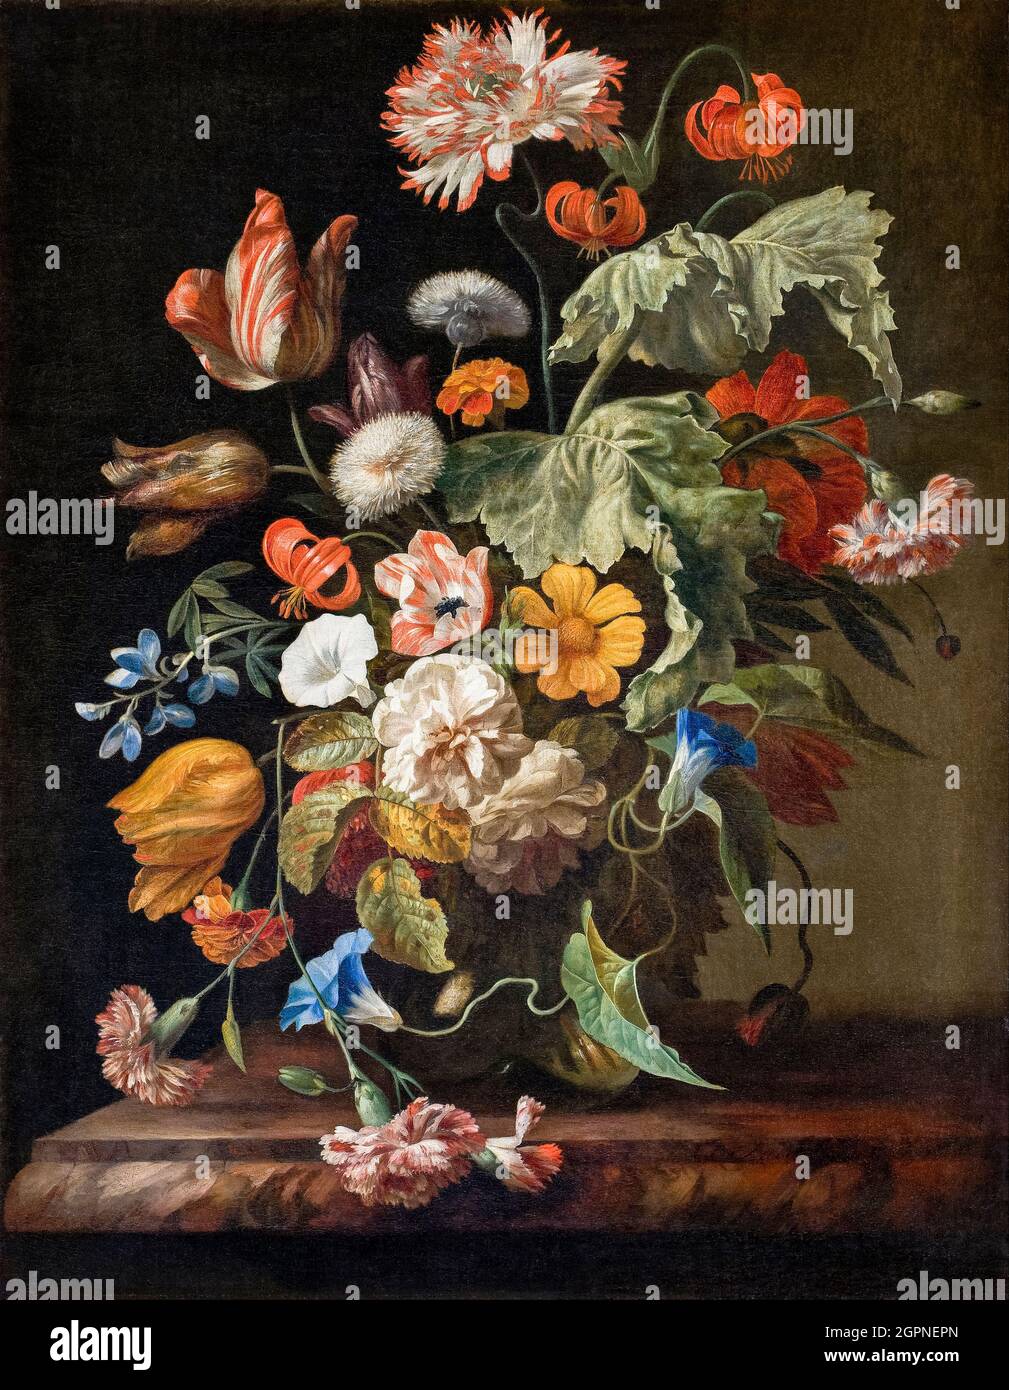 Rachel Ruysch, still life painting, Still Life with Flowers, before 1750 Stock Photo